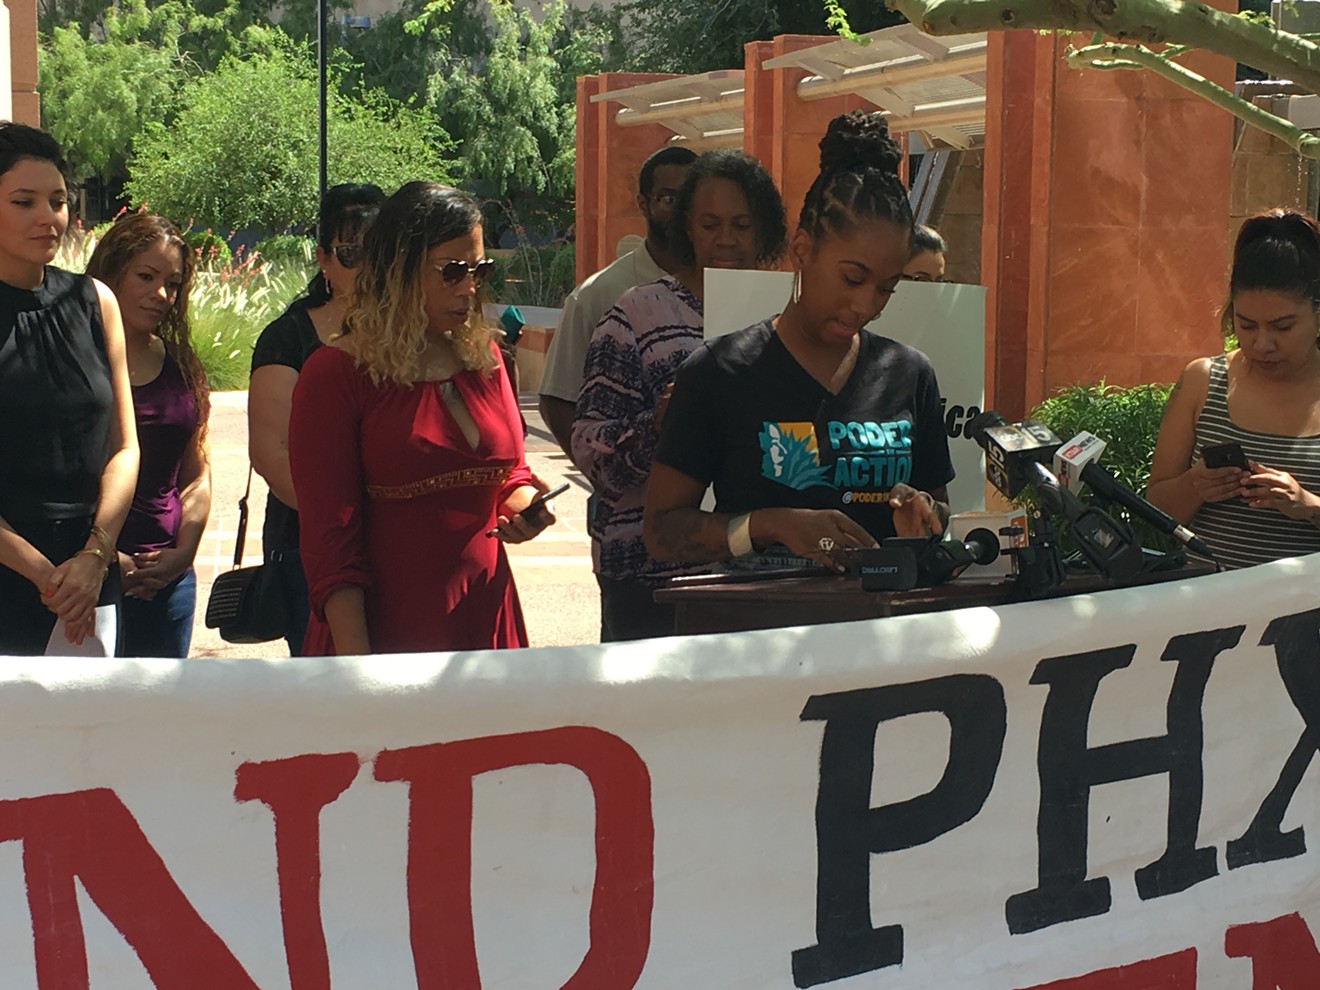 Erica Reynolds (in red) stands with supporters in a press conference announcing her legal action against the city of Phoenix.